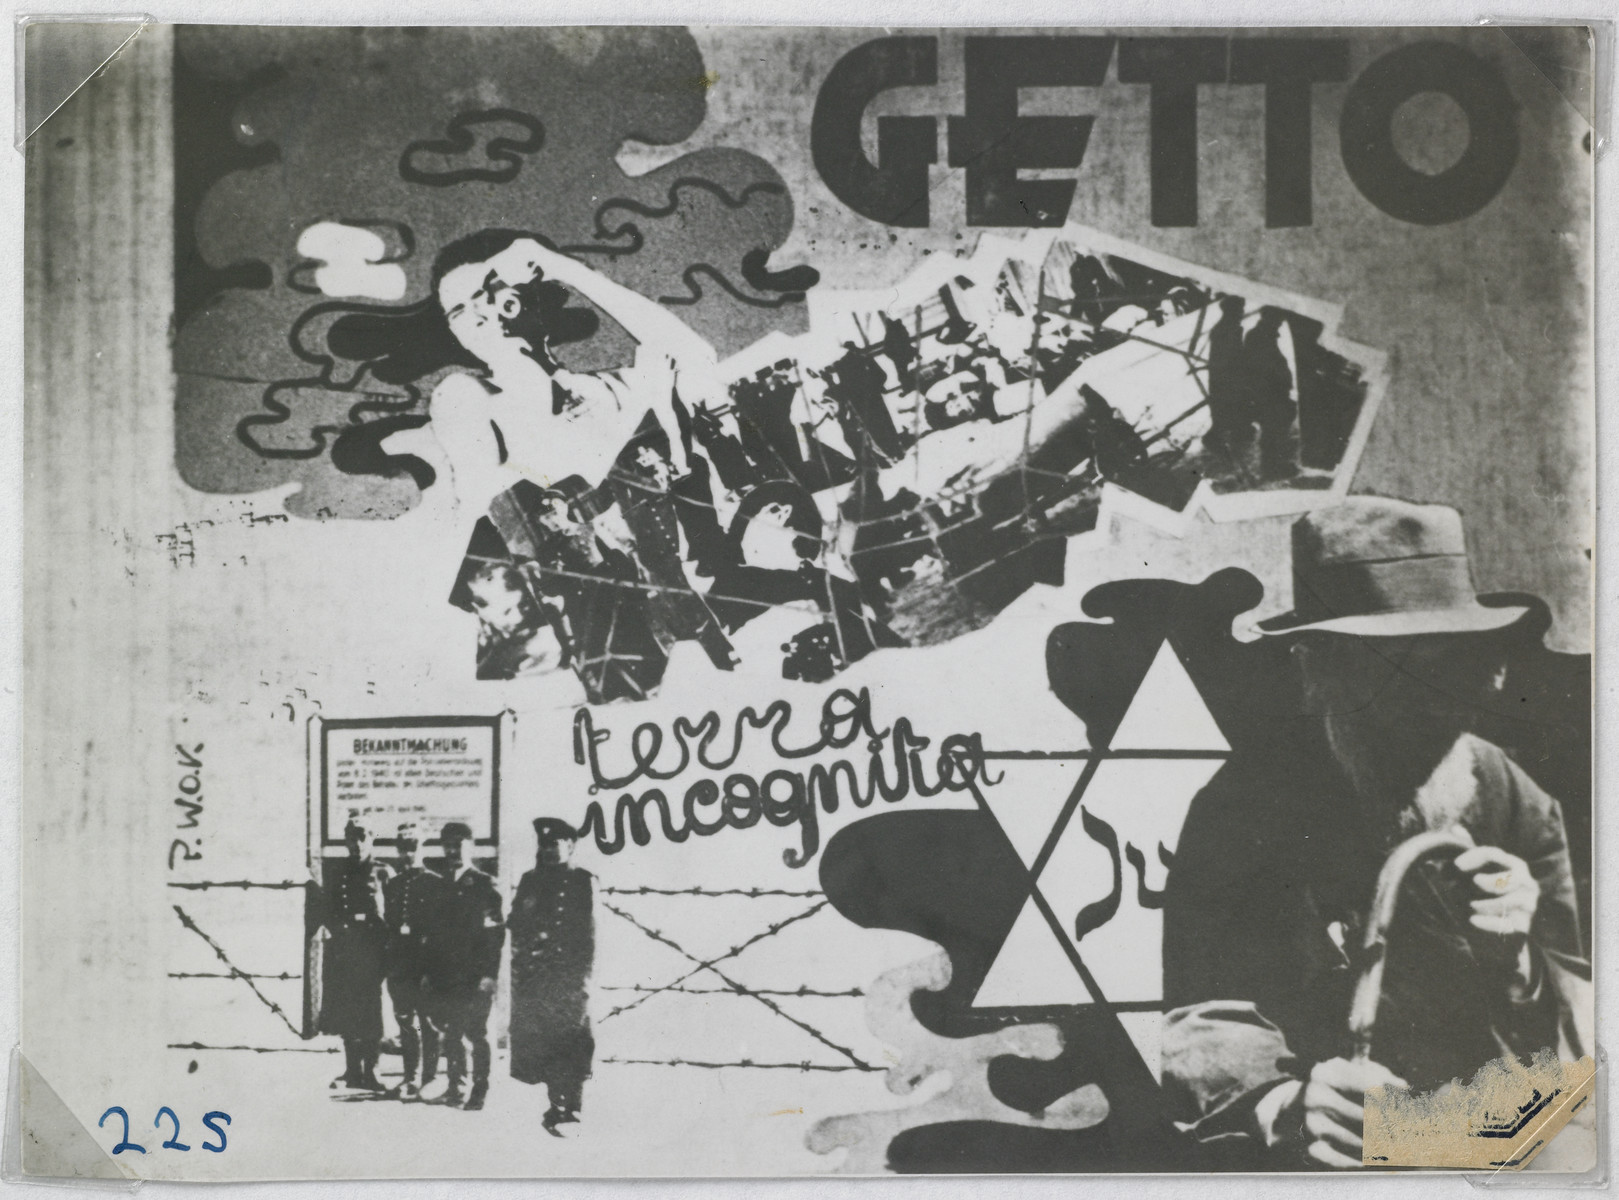 Collage created by Arie Princ (now Ben Menachem) using documents from the Lodz ghetto and photographs by Mendel Grosman. 

The sign reads: "Getto terra incognita".  The collage was published during the war by the underground organisation PWOK, the Aid for Prisoners of Concentration Camps.